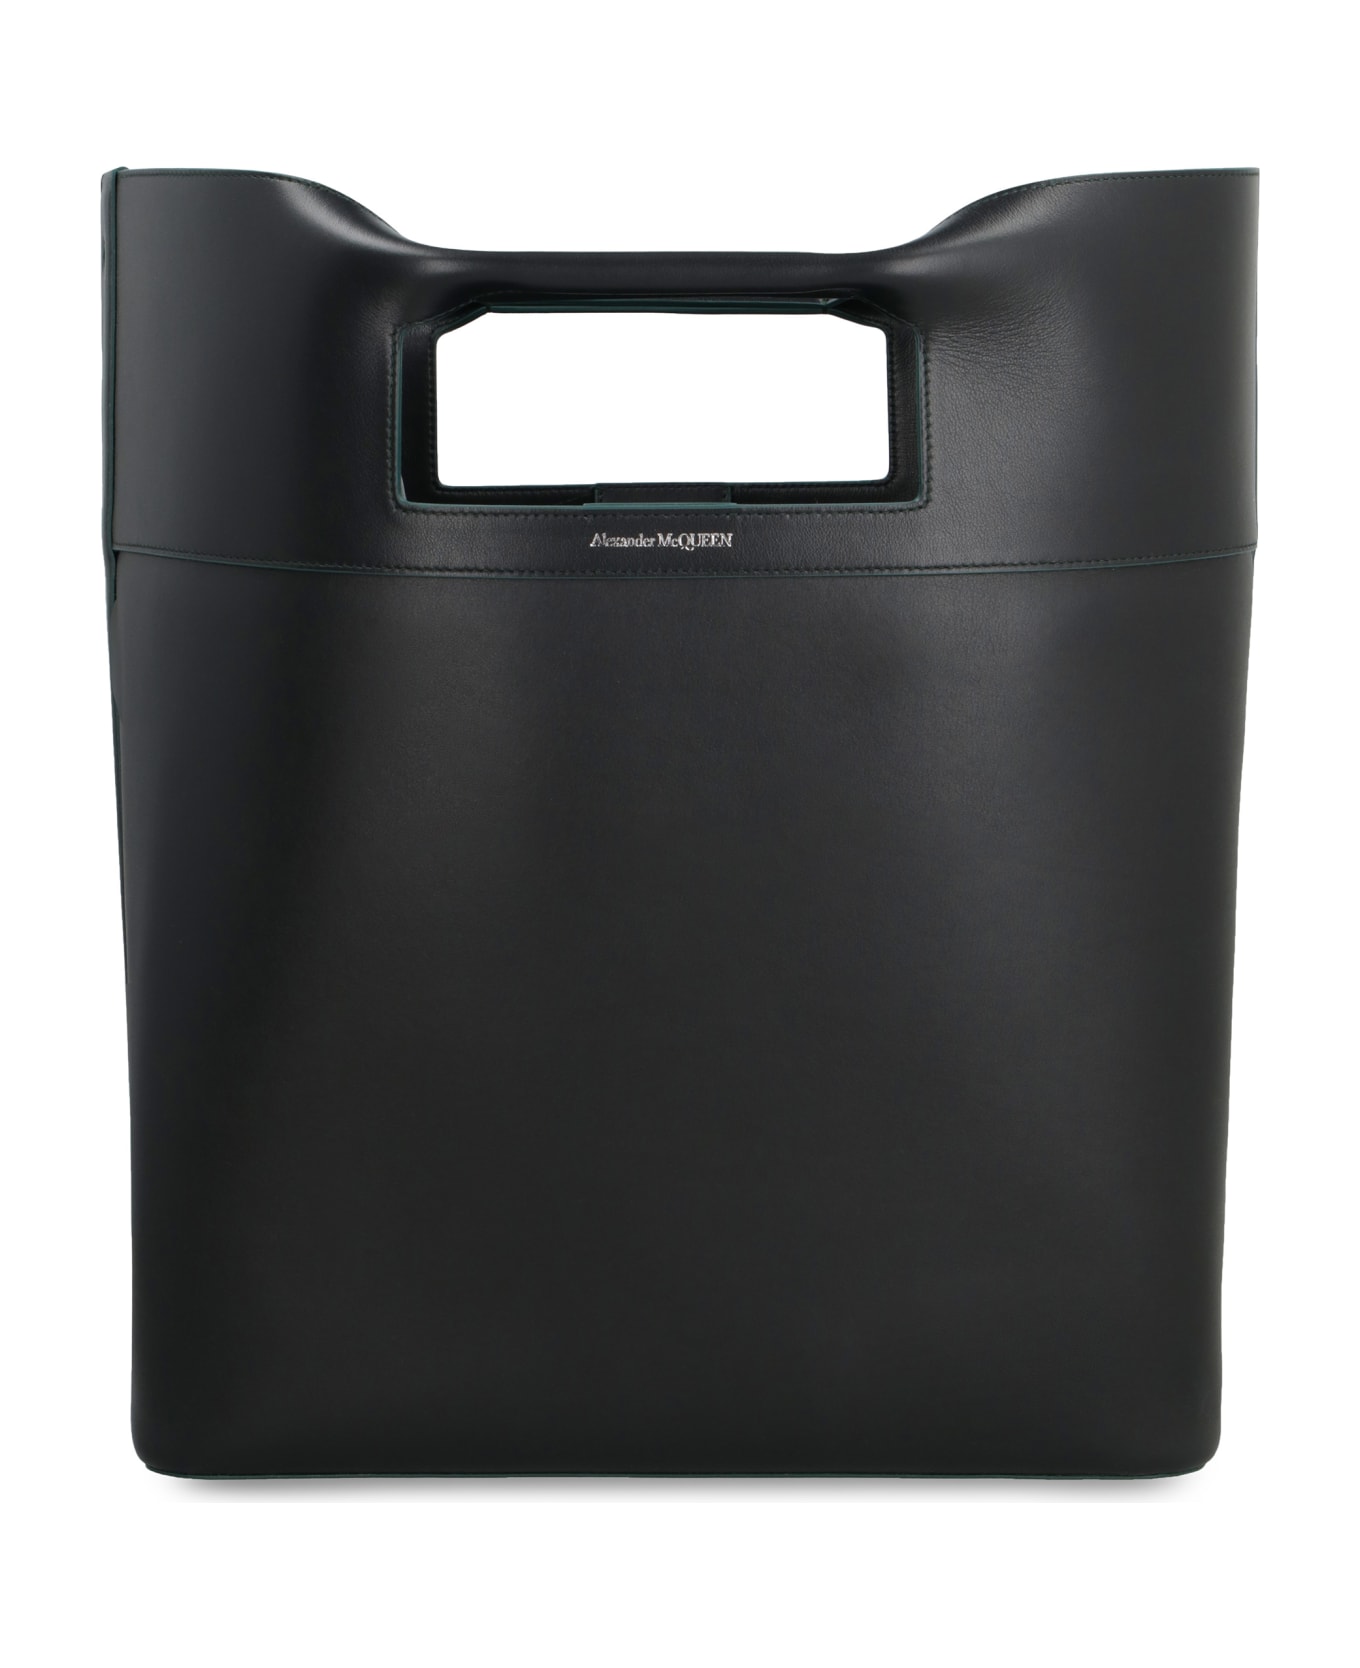 Alexander McQueen The Square Bow Leather Bag - black トートバッグ